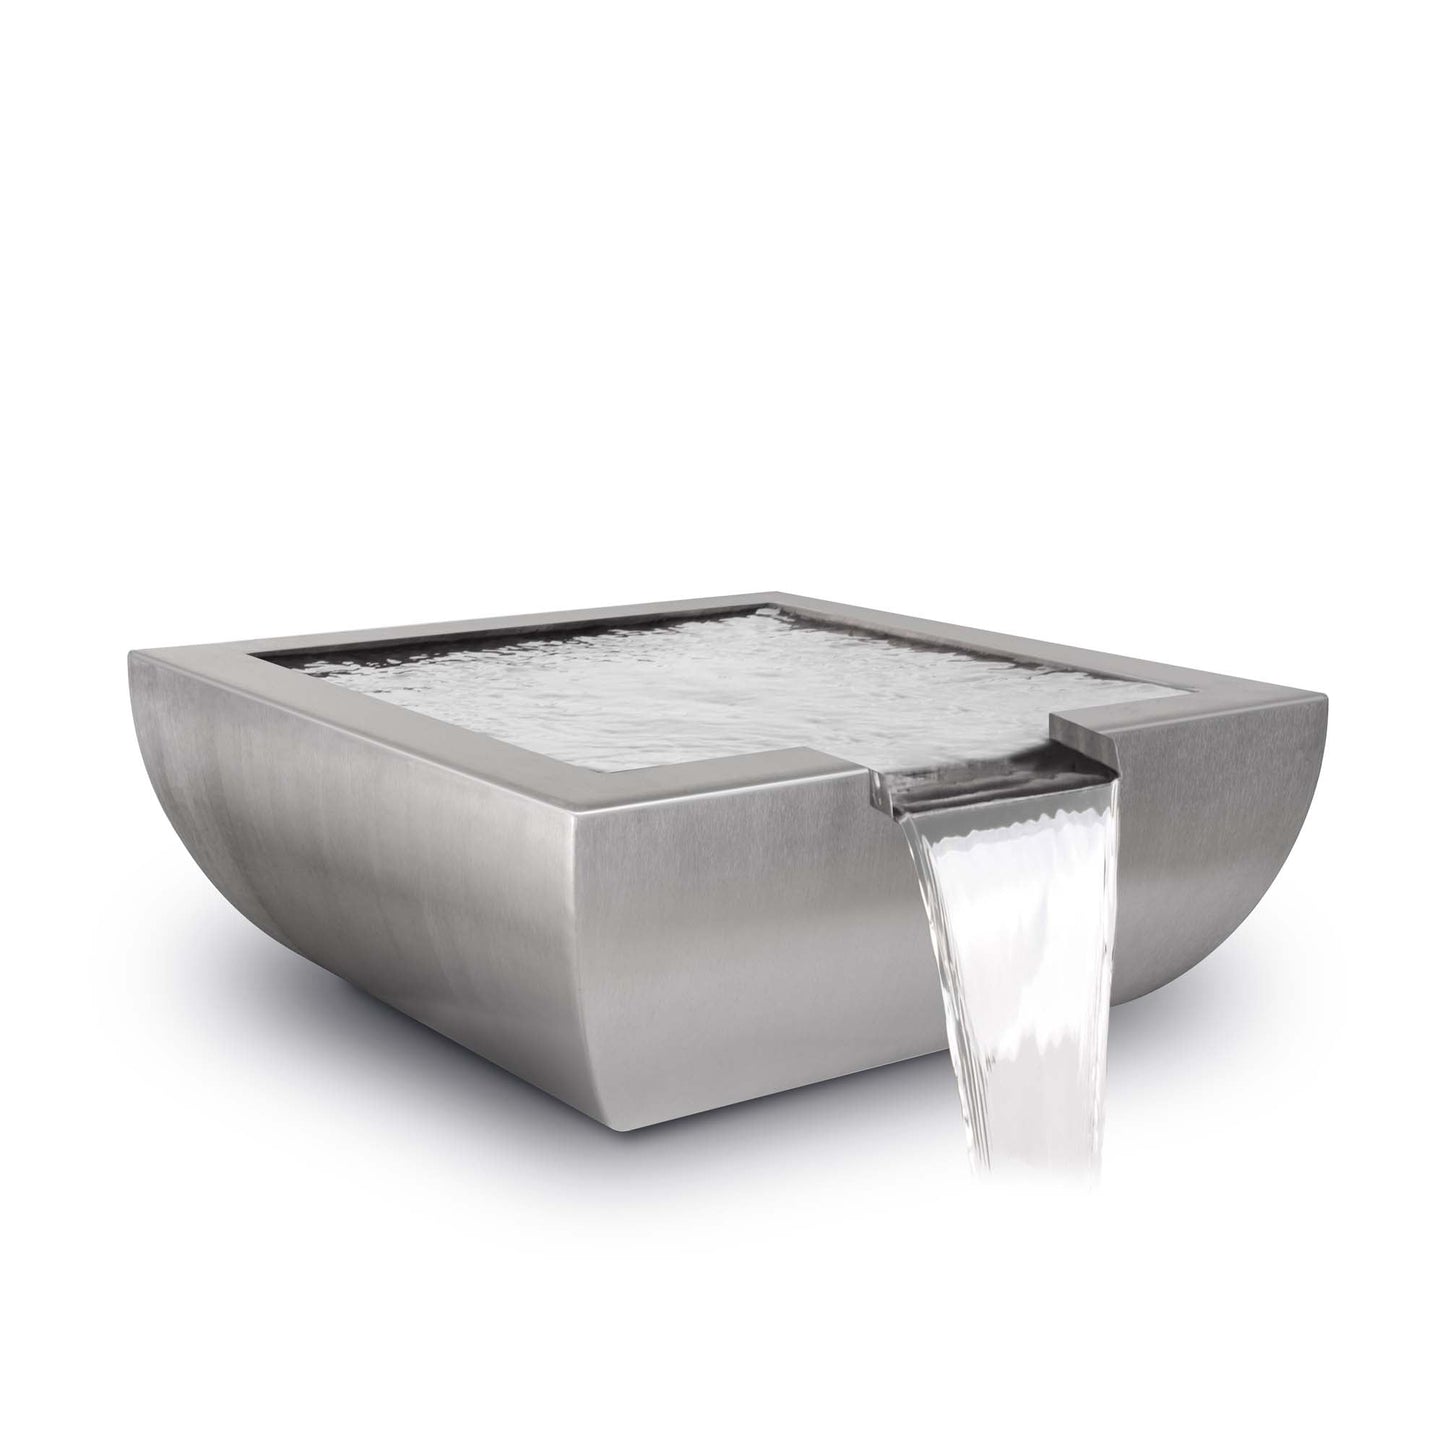 The Outdoor Plus Square Avalon 24" Copper Vein Powder Coated Water Bowl